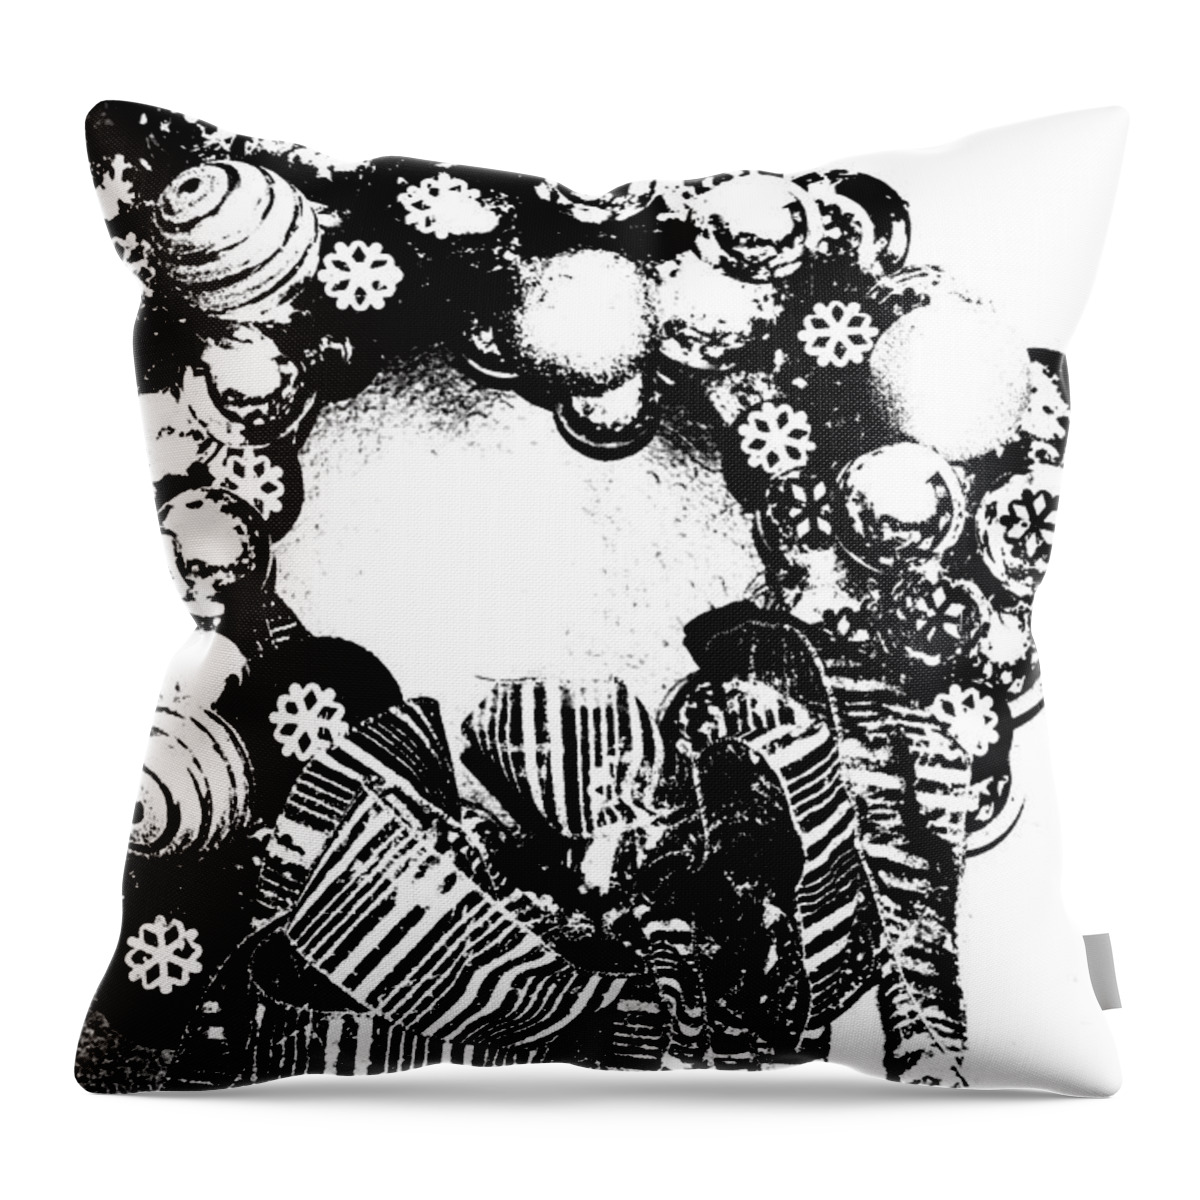 Black And White Throw Pillow featuring the photograph Black And White Wreath by Diane montana Jansson